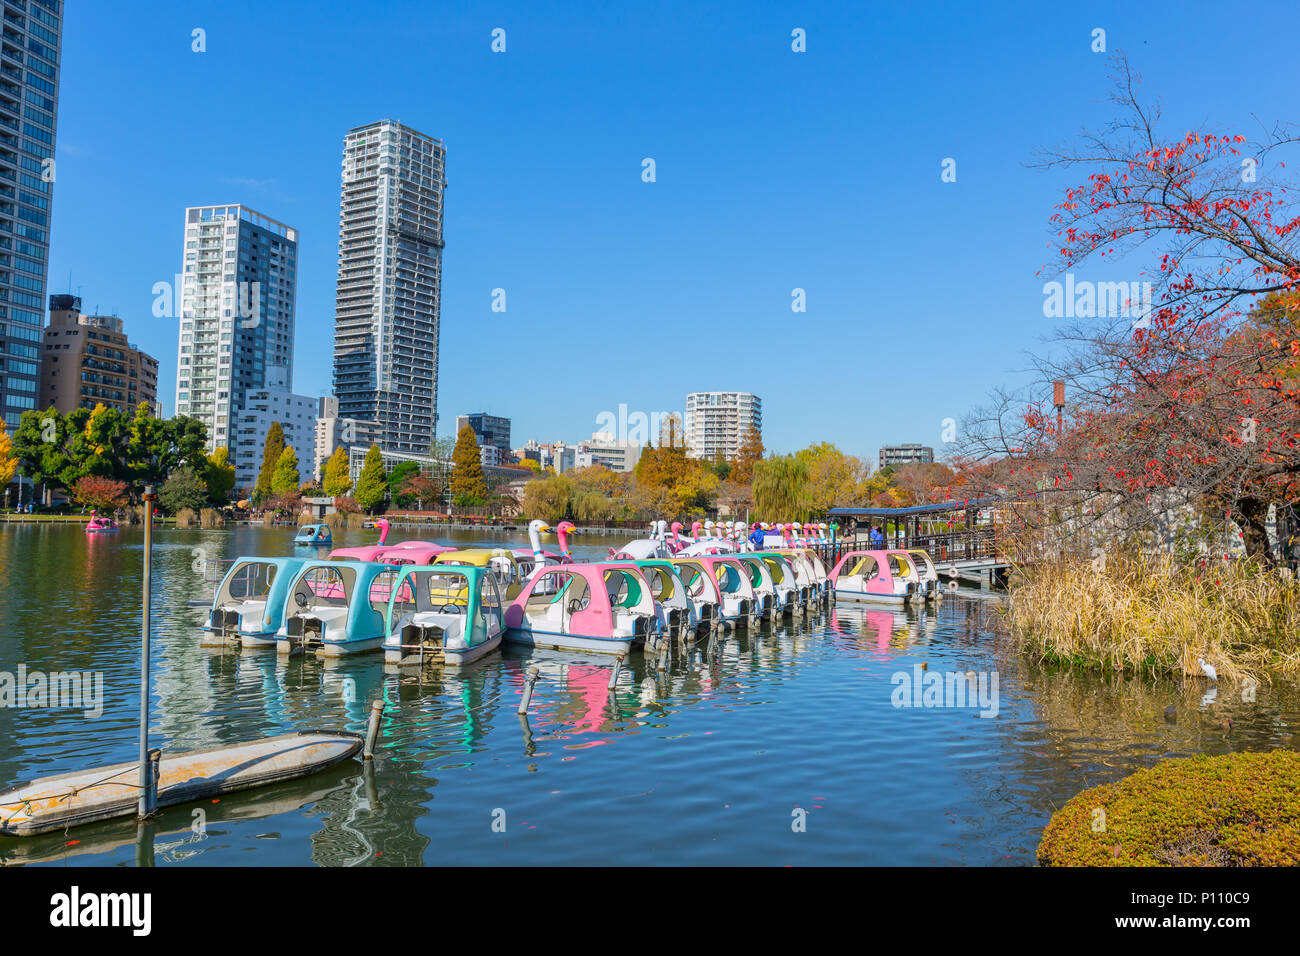 Ueno Park is most popular public relax green space lake with pedal boats in central of Tokyo established in 1873 with 8,800 trees and sakura that bloo Stock Photo